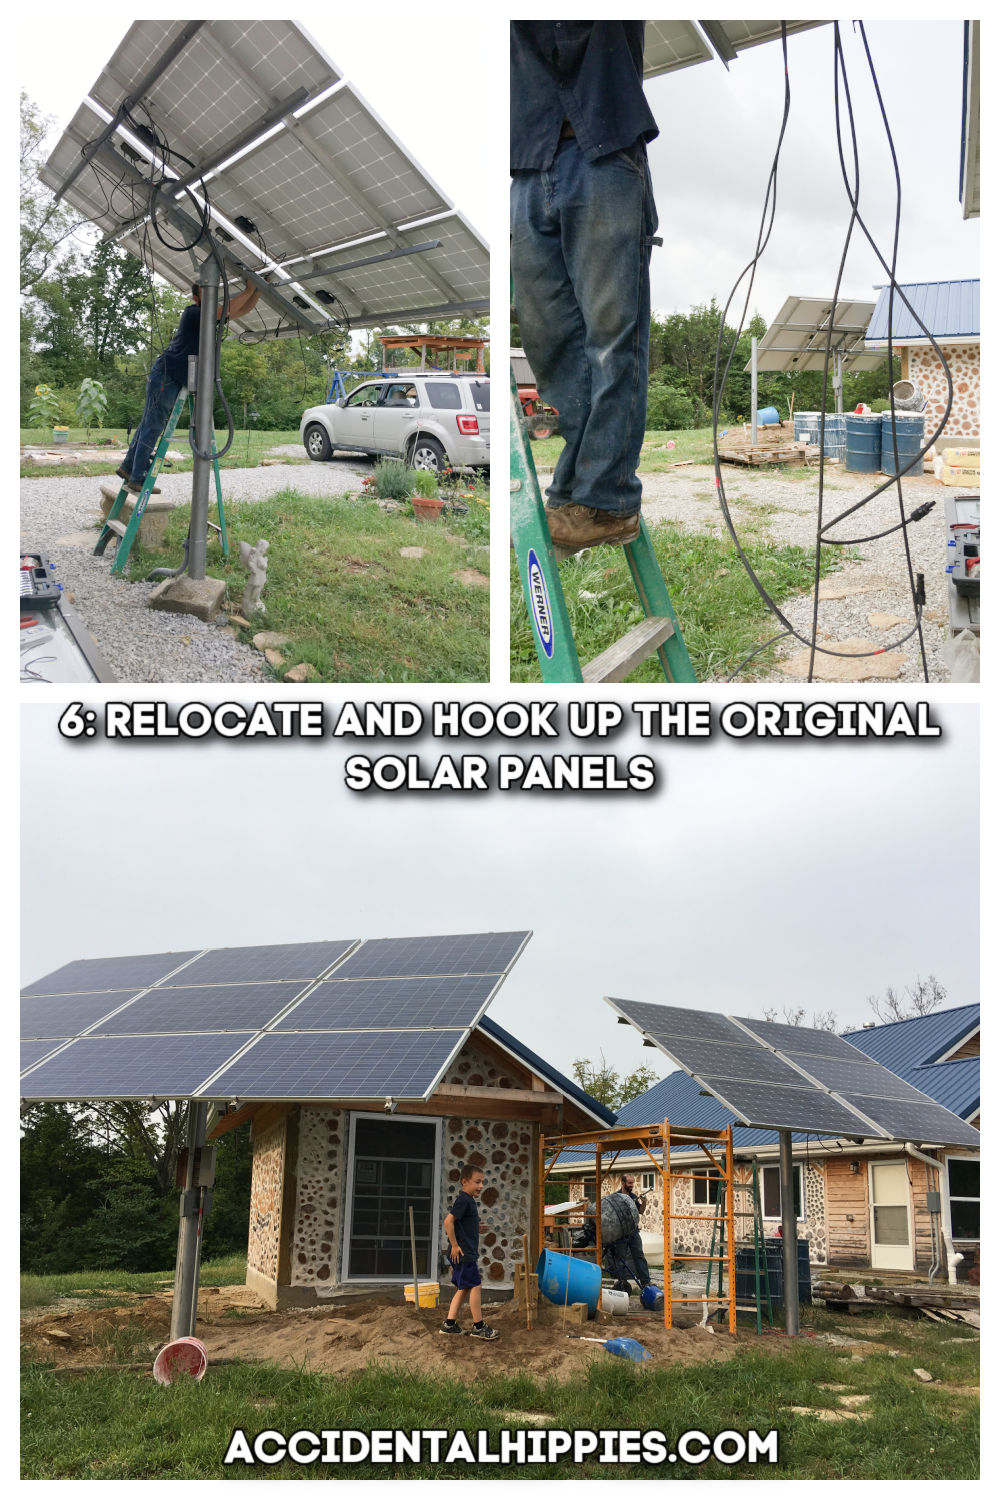 Taking down a set of solar panels shown above and the completed set of 15 panels in front of a shed shown below